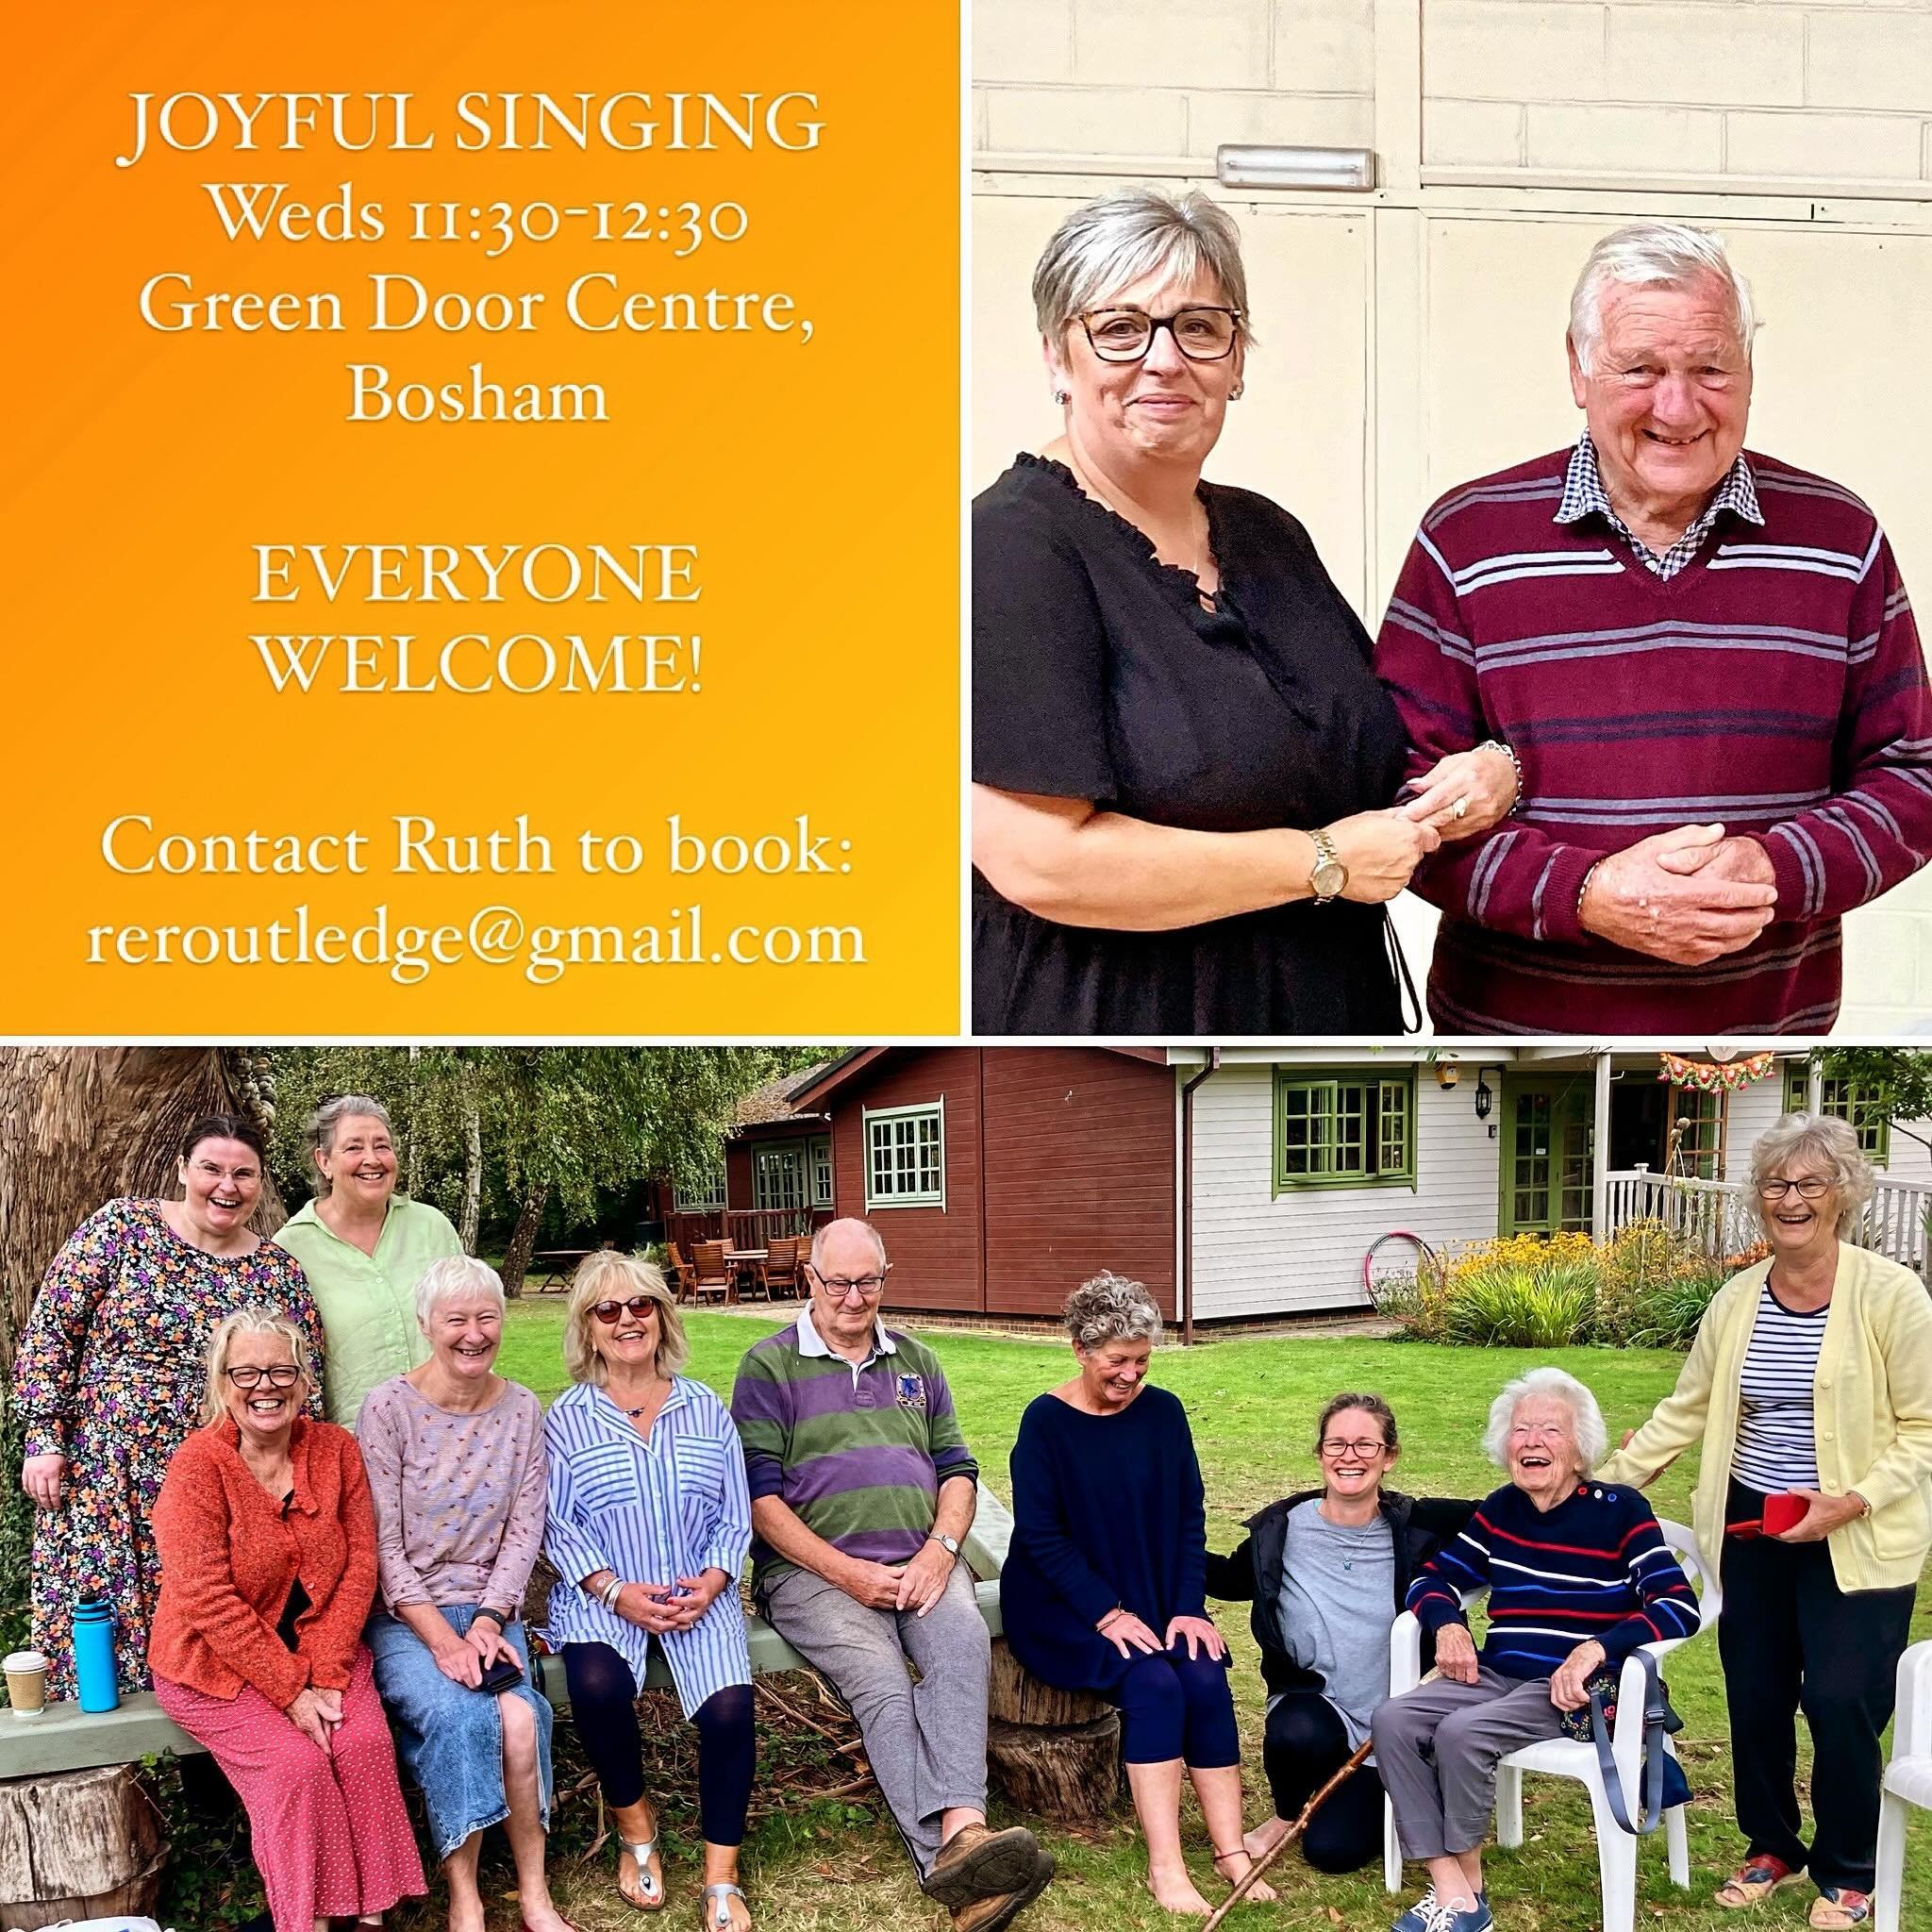 It&rsquo;s tomorrow! Come just as you are to JOYFUL SINGING, which is exactly what it says on the tin: fun, friendly singing for everyone, leaving you feeling uplifted and full of joy 😁 
.
All in the beautiful sanctuary that is @greendoorcentre in B